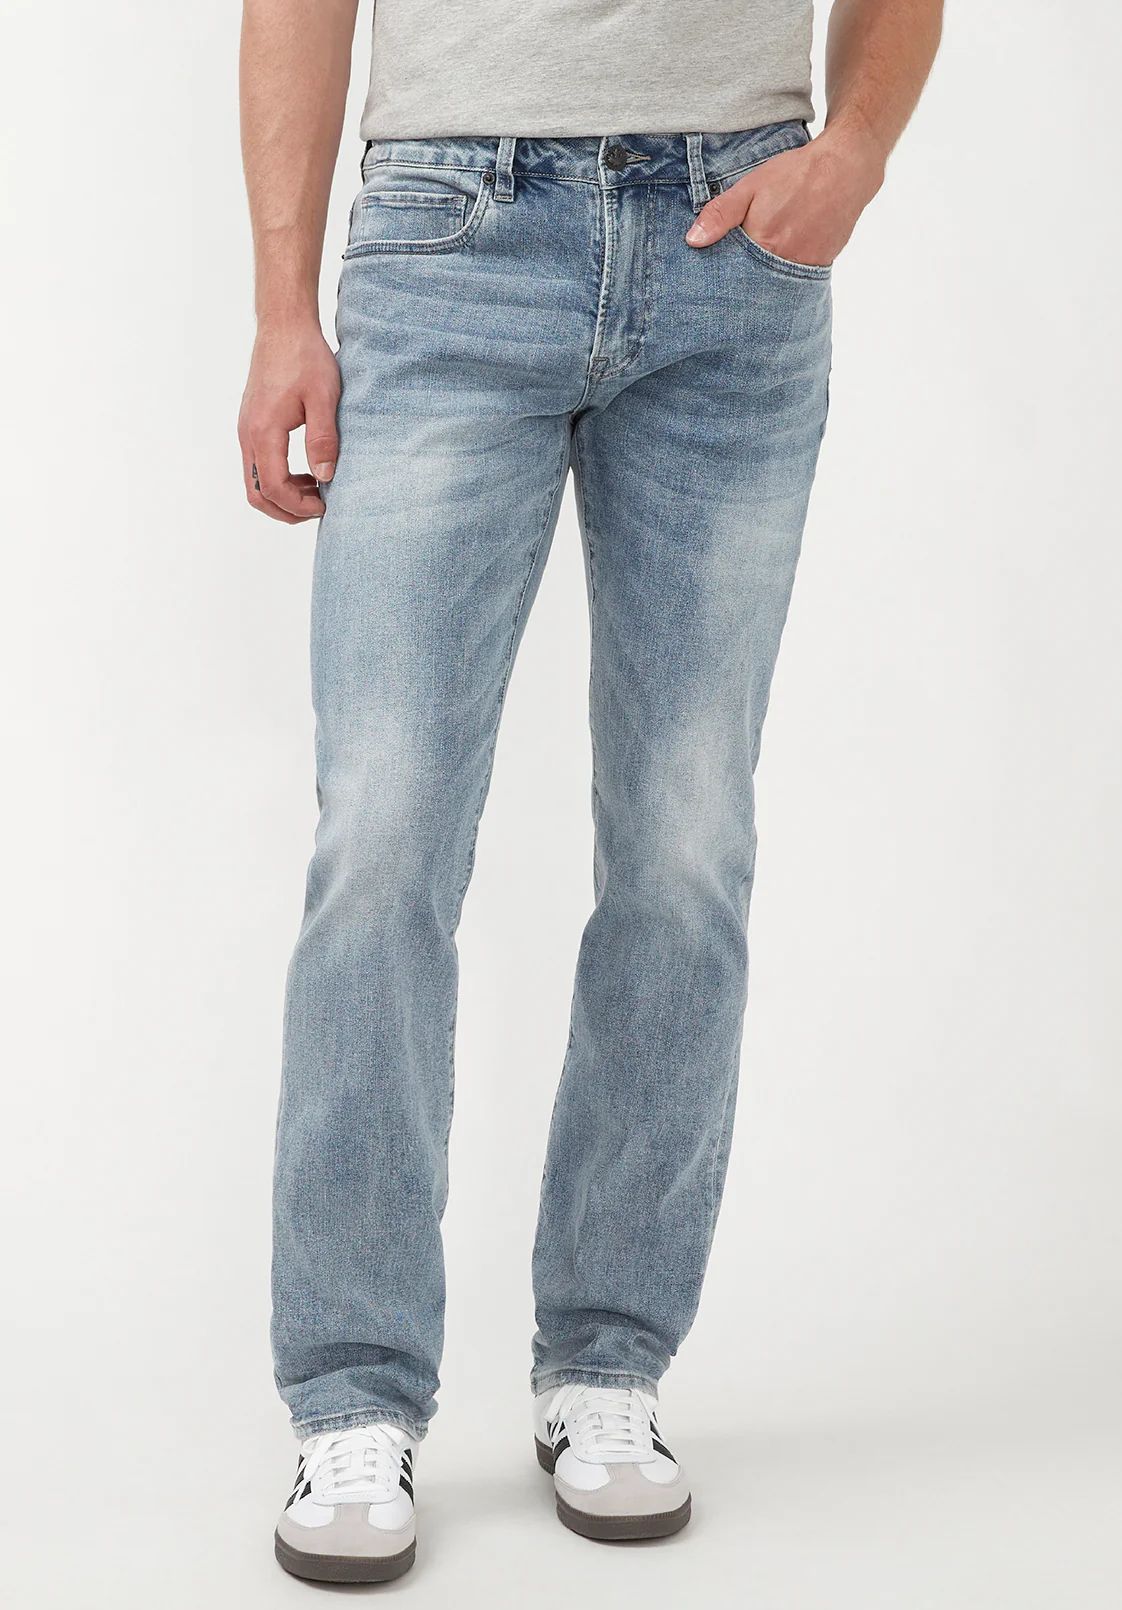 Straight Six Men's Jeans in Whiskered and Contrasted Blue - BM22634 | Buffalo David Bitton